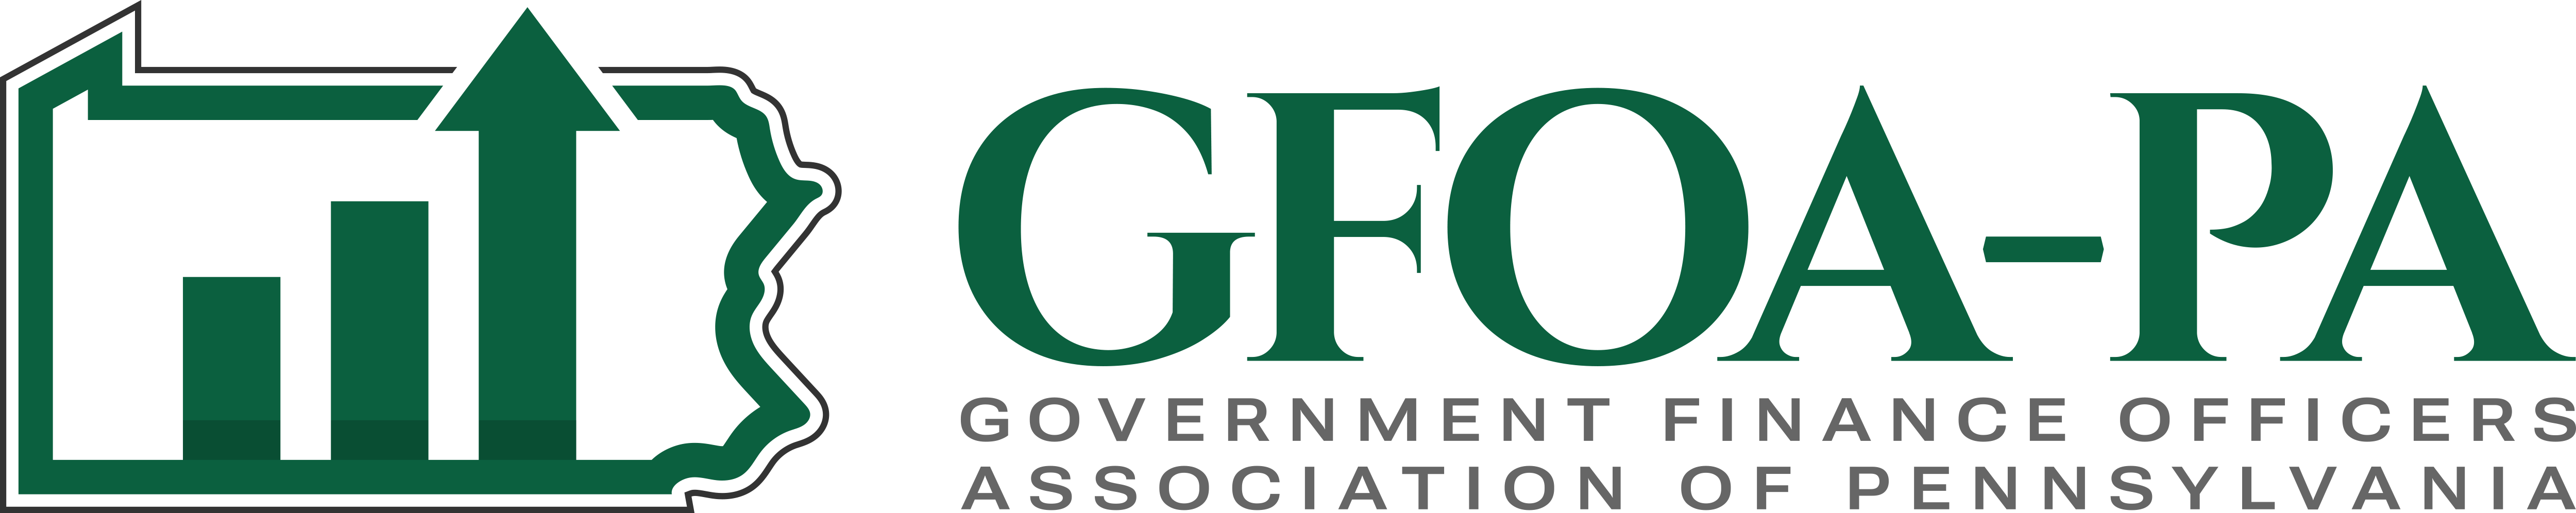 The Government Finance Officers Association of Pennsylvania